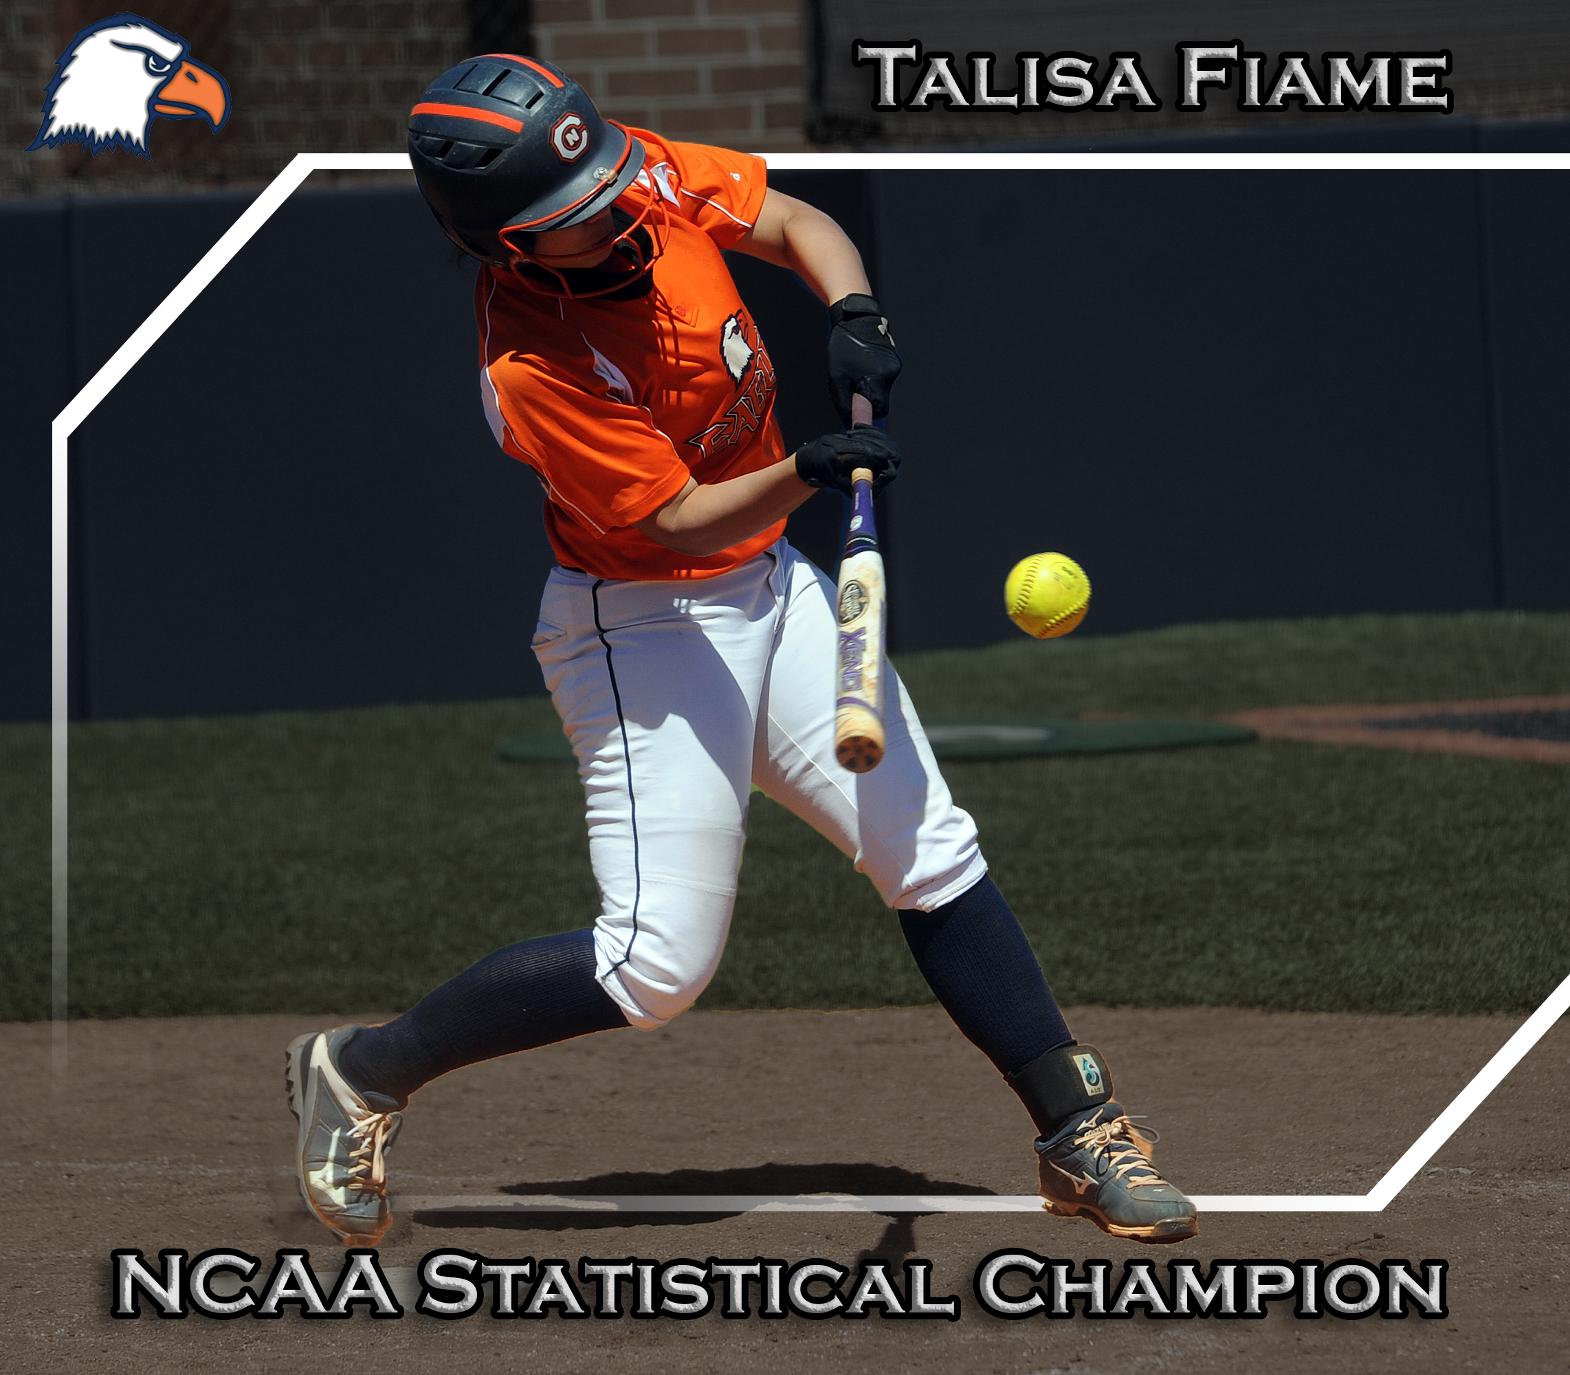 Fiame wins NCAA Statistical Championship as toughest player to strike out